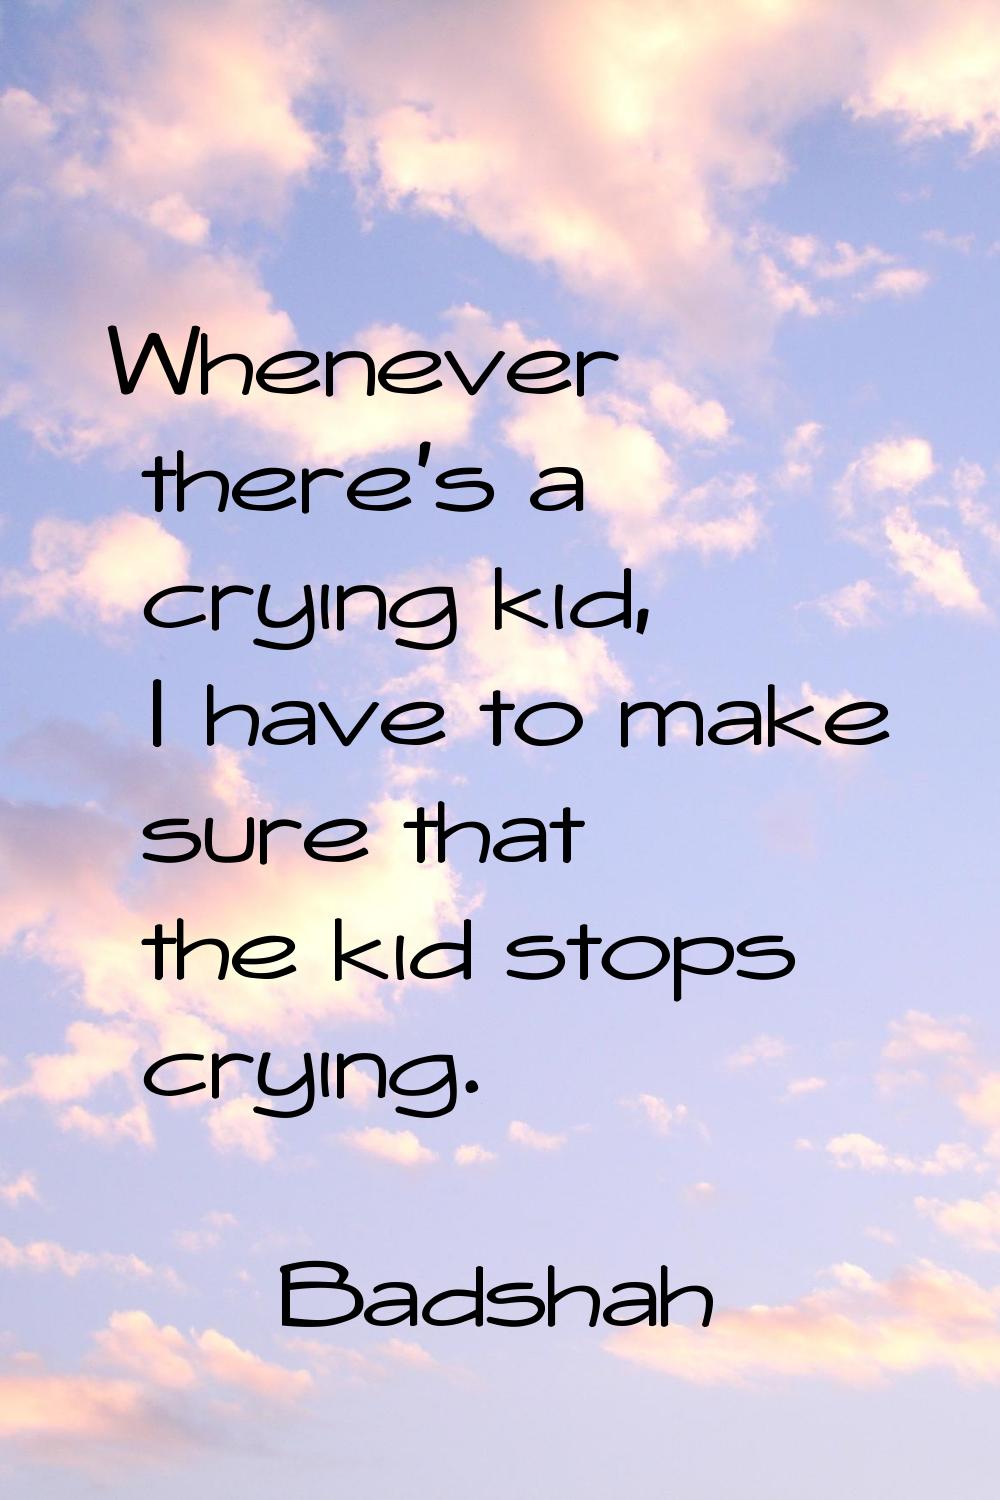 Whenever there's a crying kid, I have to make sure that the kid stops crying.